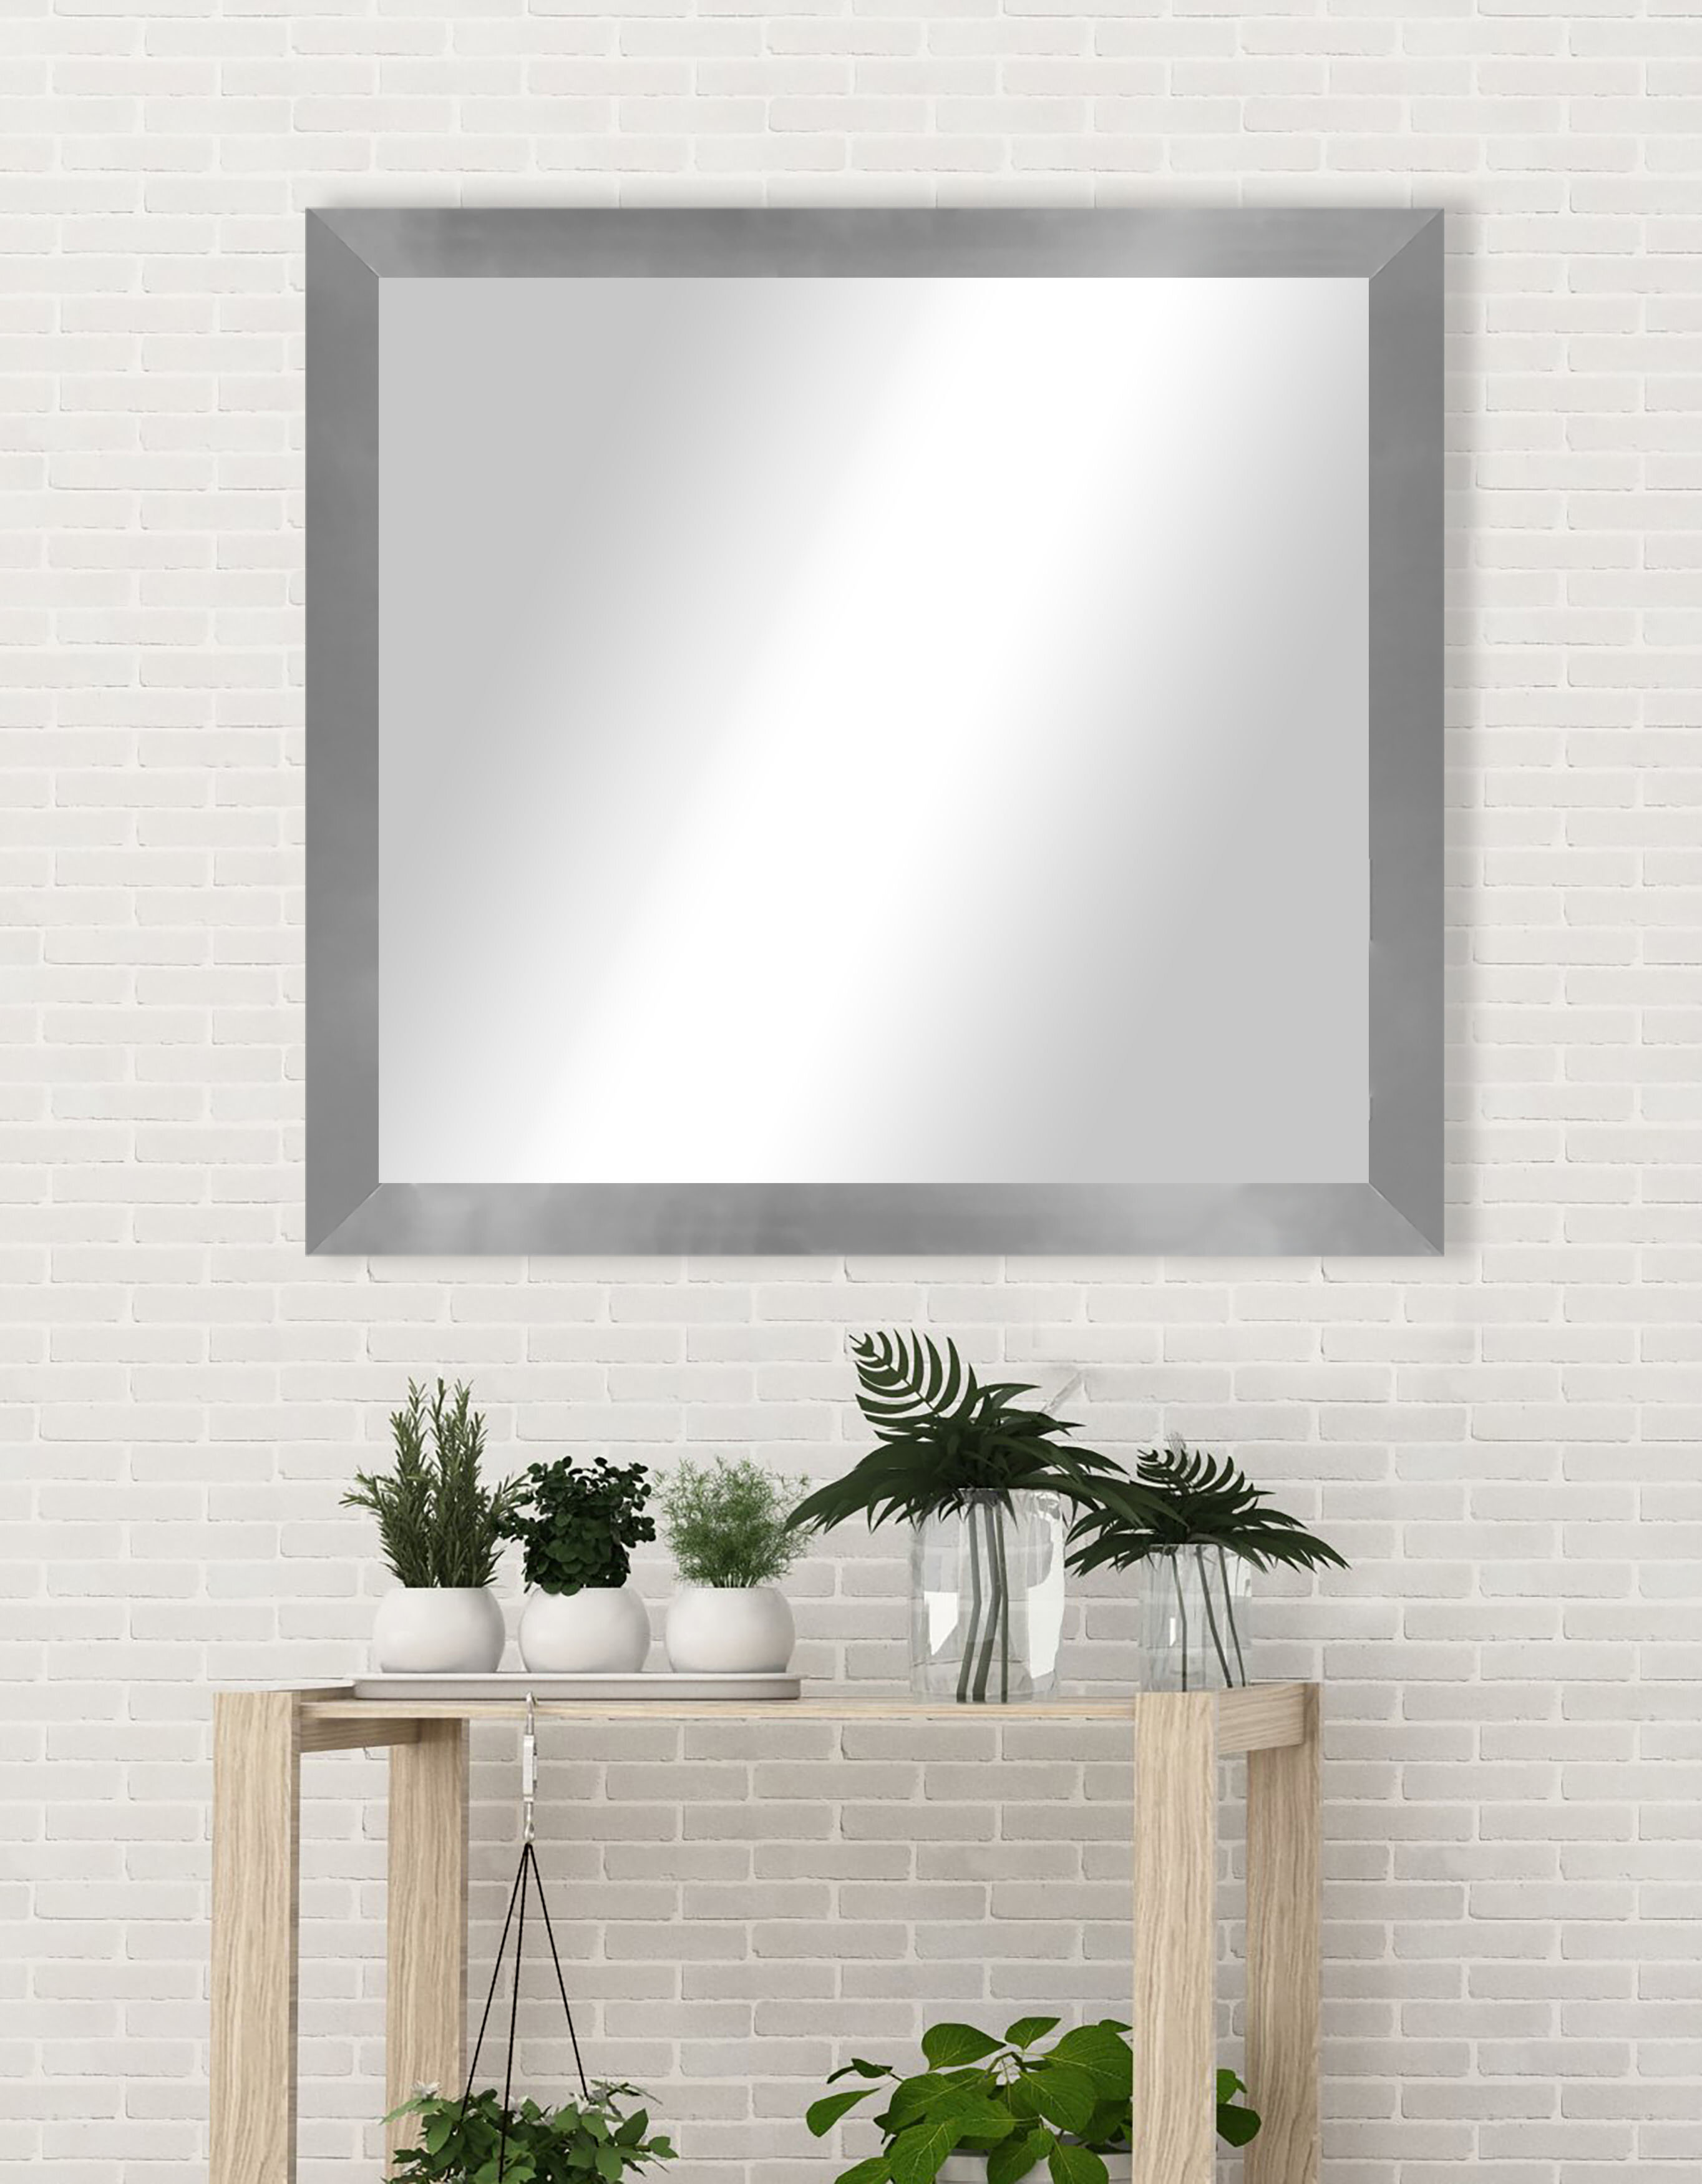 Wayfair | Square Wood Mirrors You'll Love in 2022